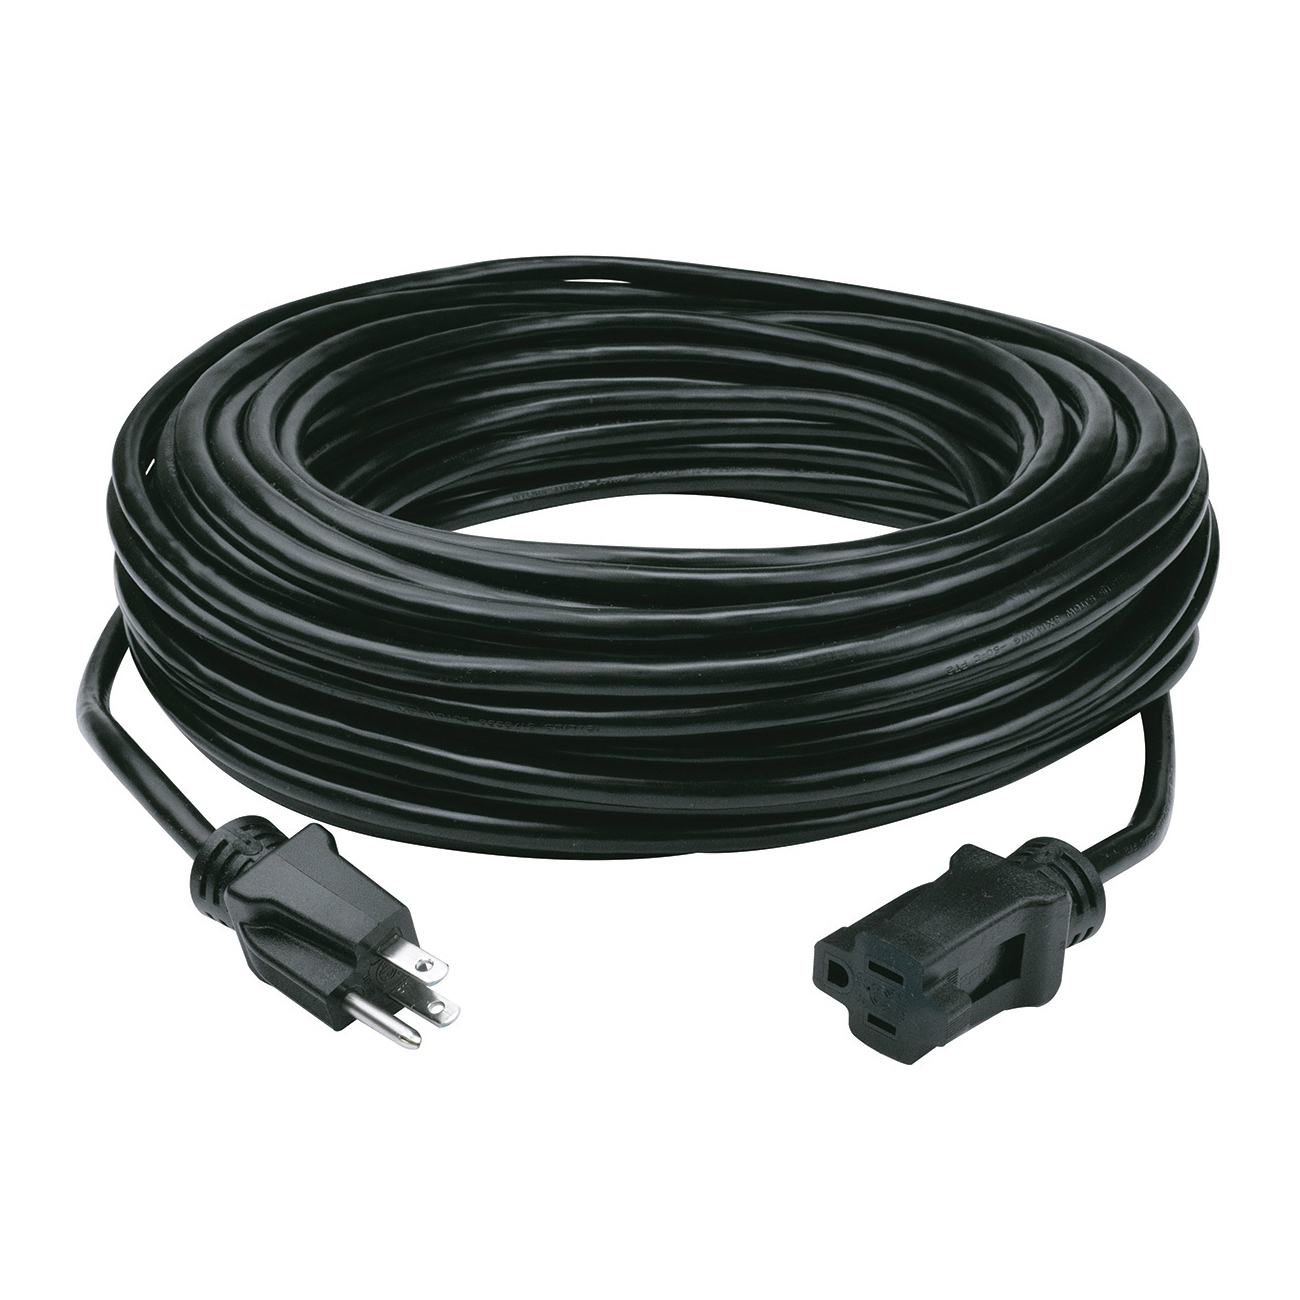 OR532735 Extension Cord, 100 ft L, Black